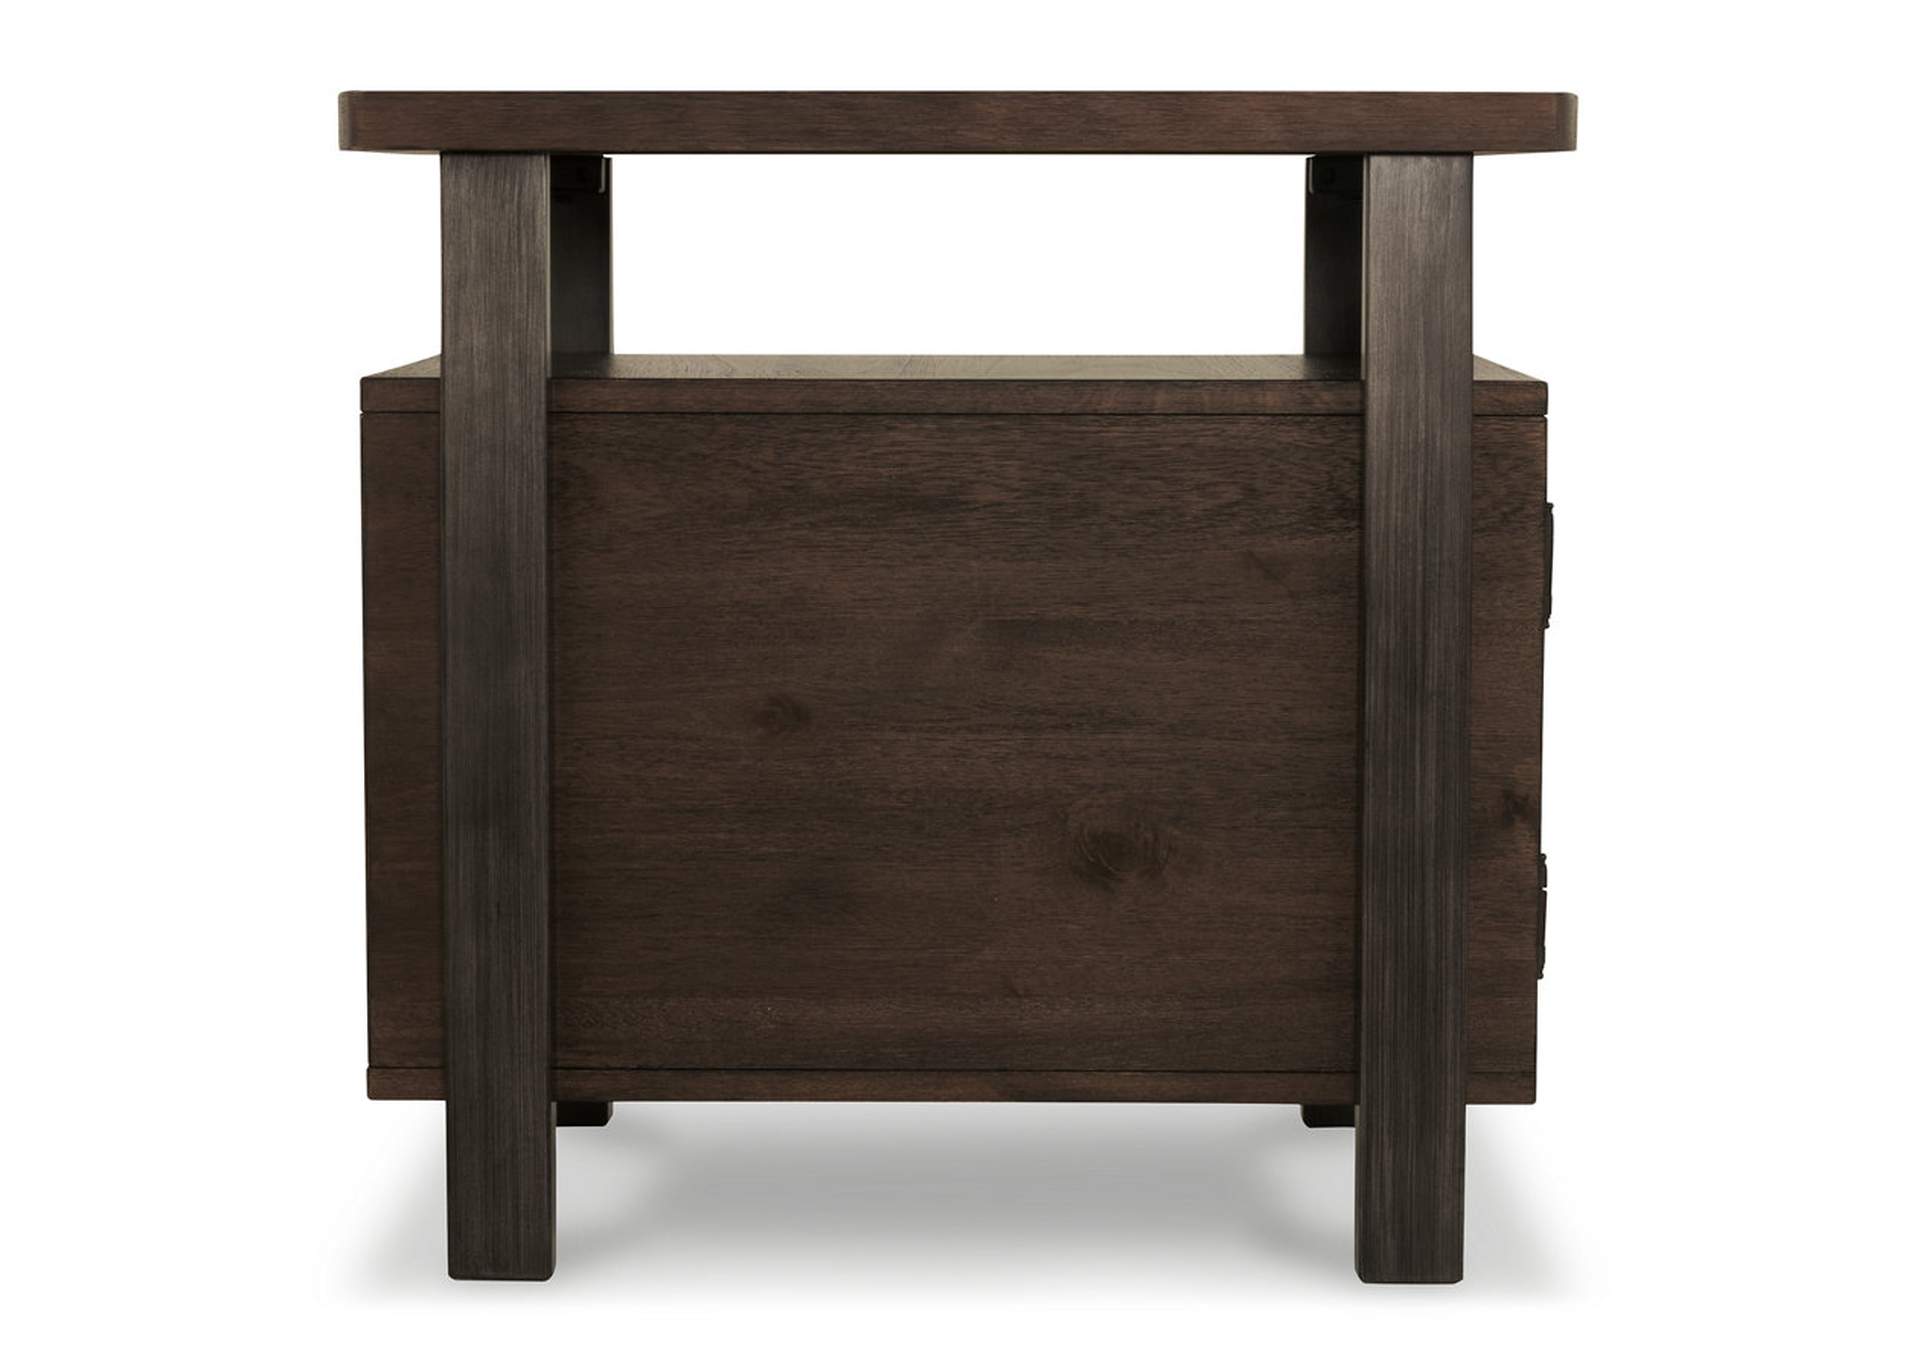 Vailbry Chairside End Table,Signature Design By Ashley